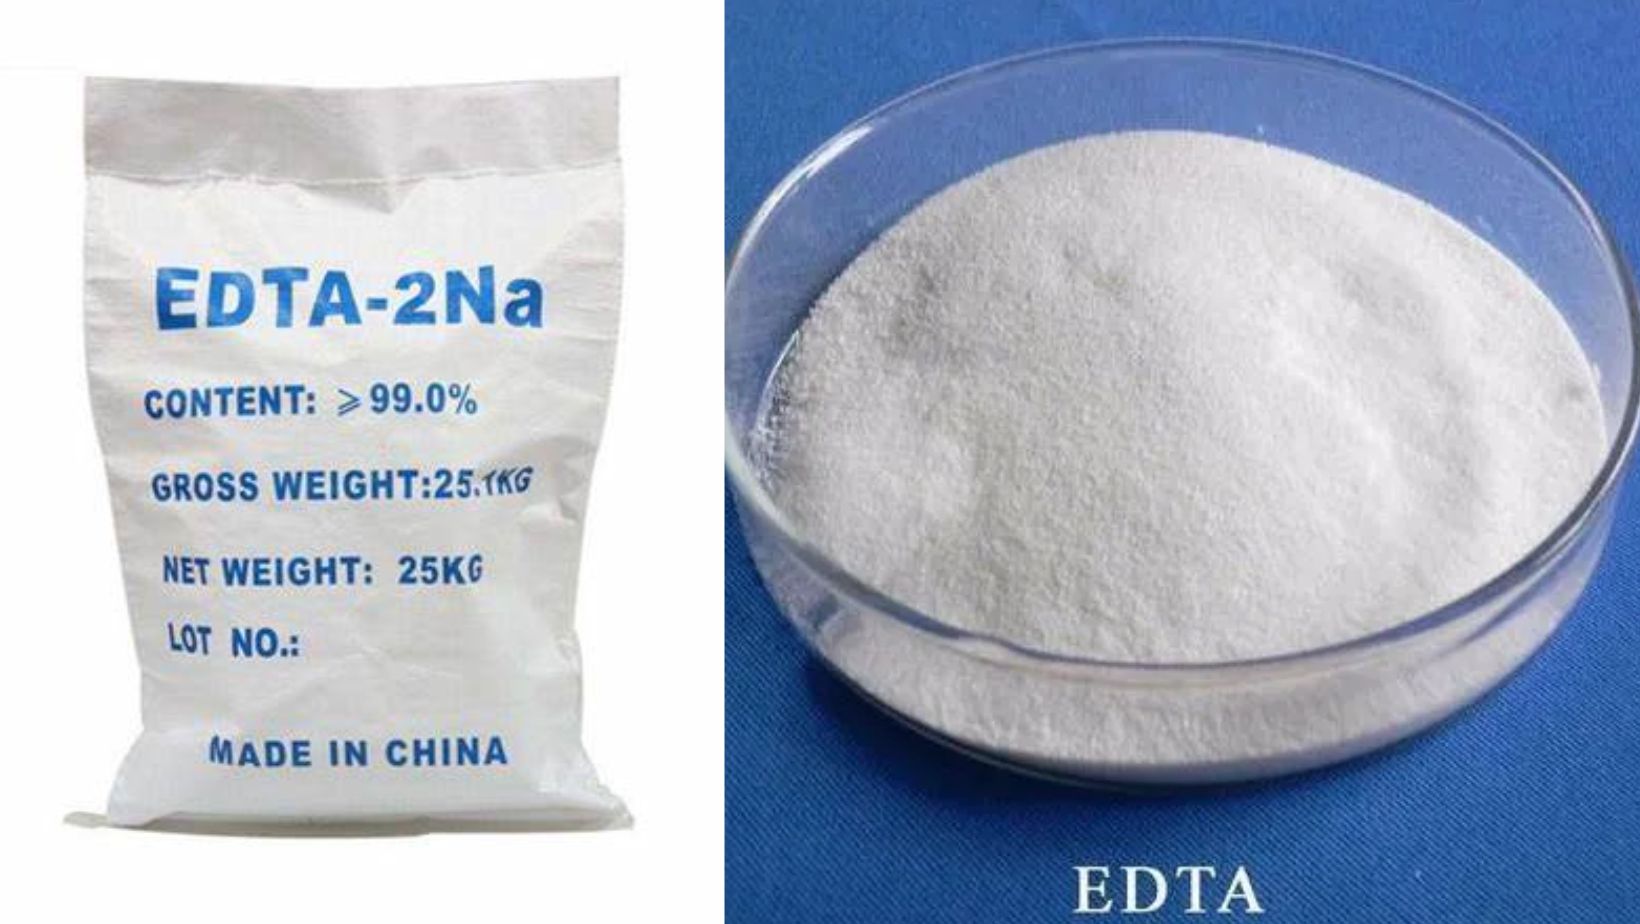 What Is EDTA, And Where Is It Used?